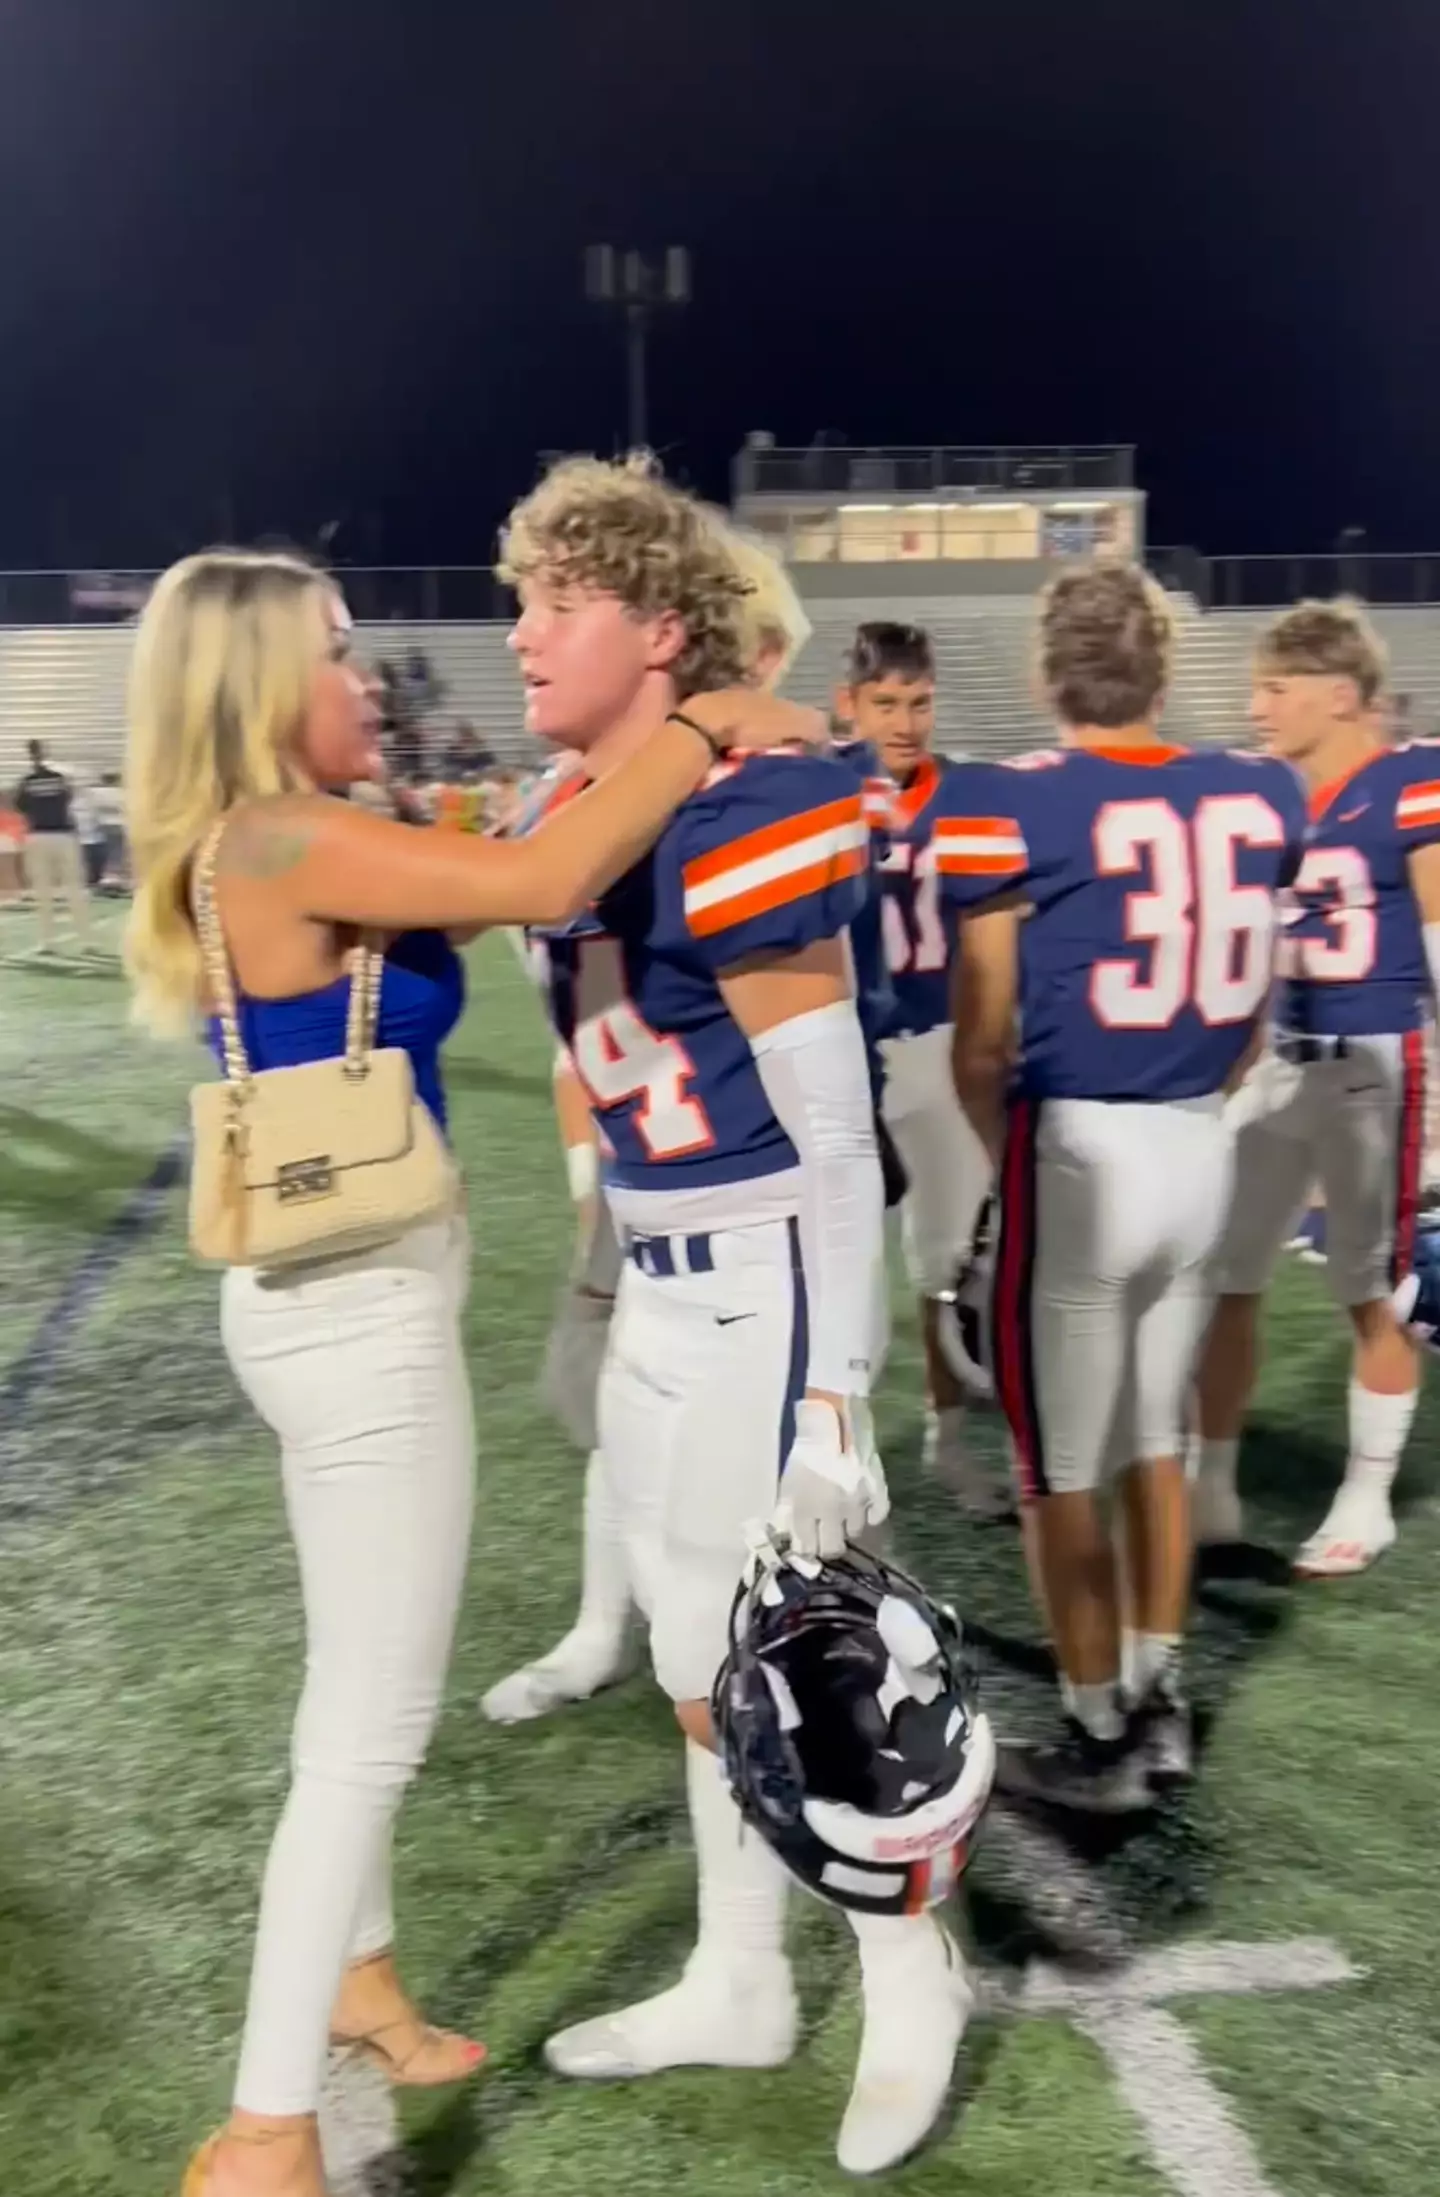 Amber Wright hugged her son Brixton after his team had won a home game.